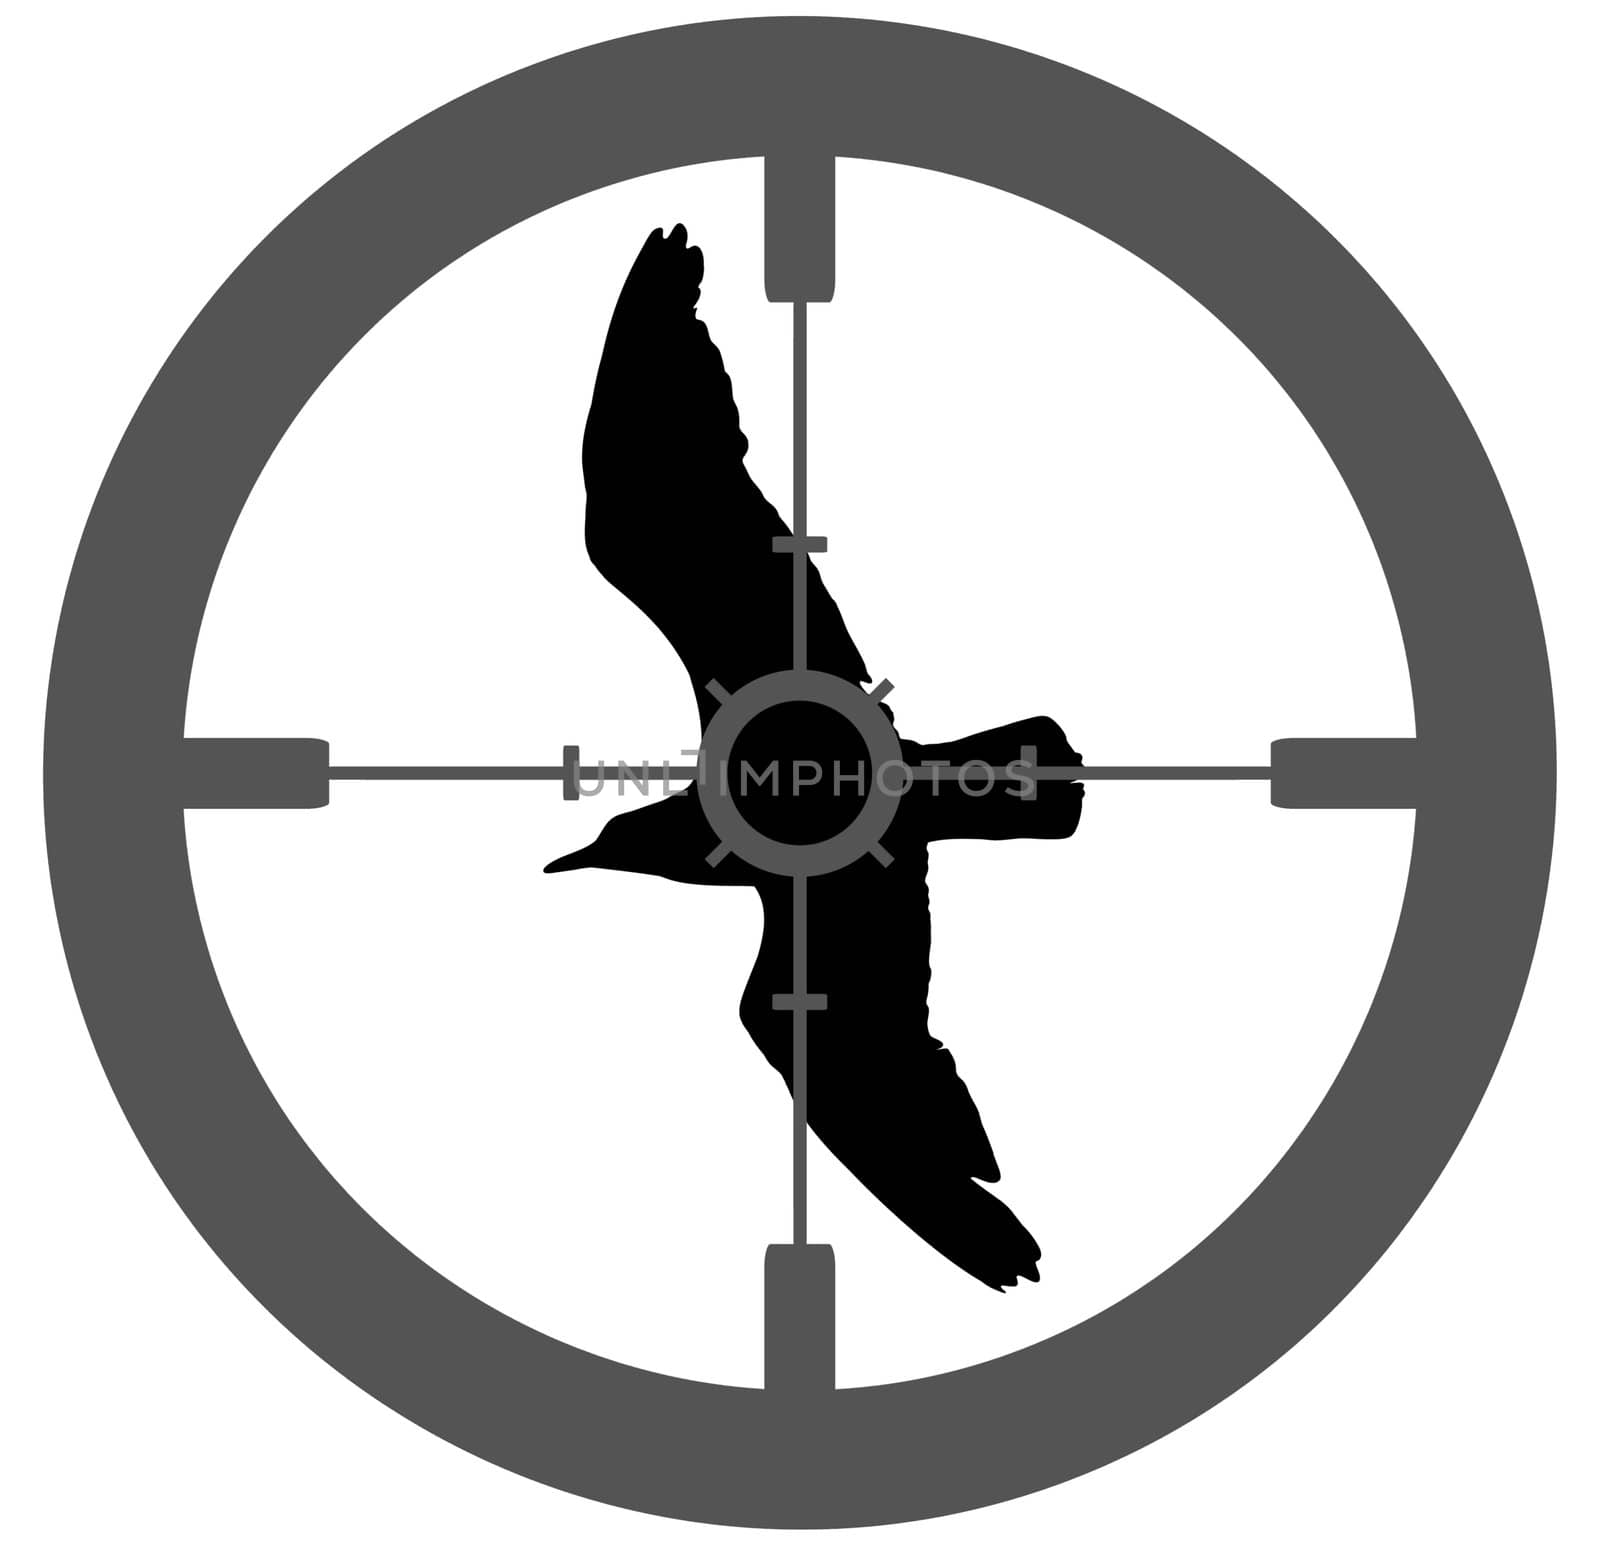 Illustration of a silhouette bird with a gun  sight aiming at its body